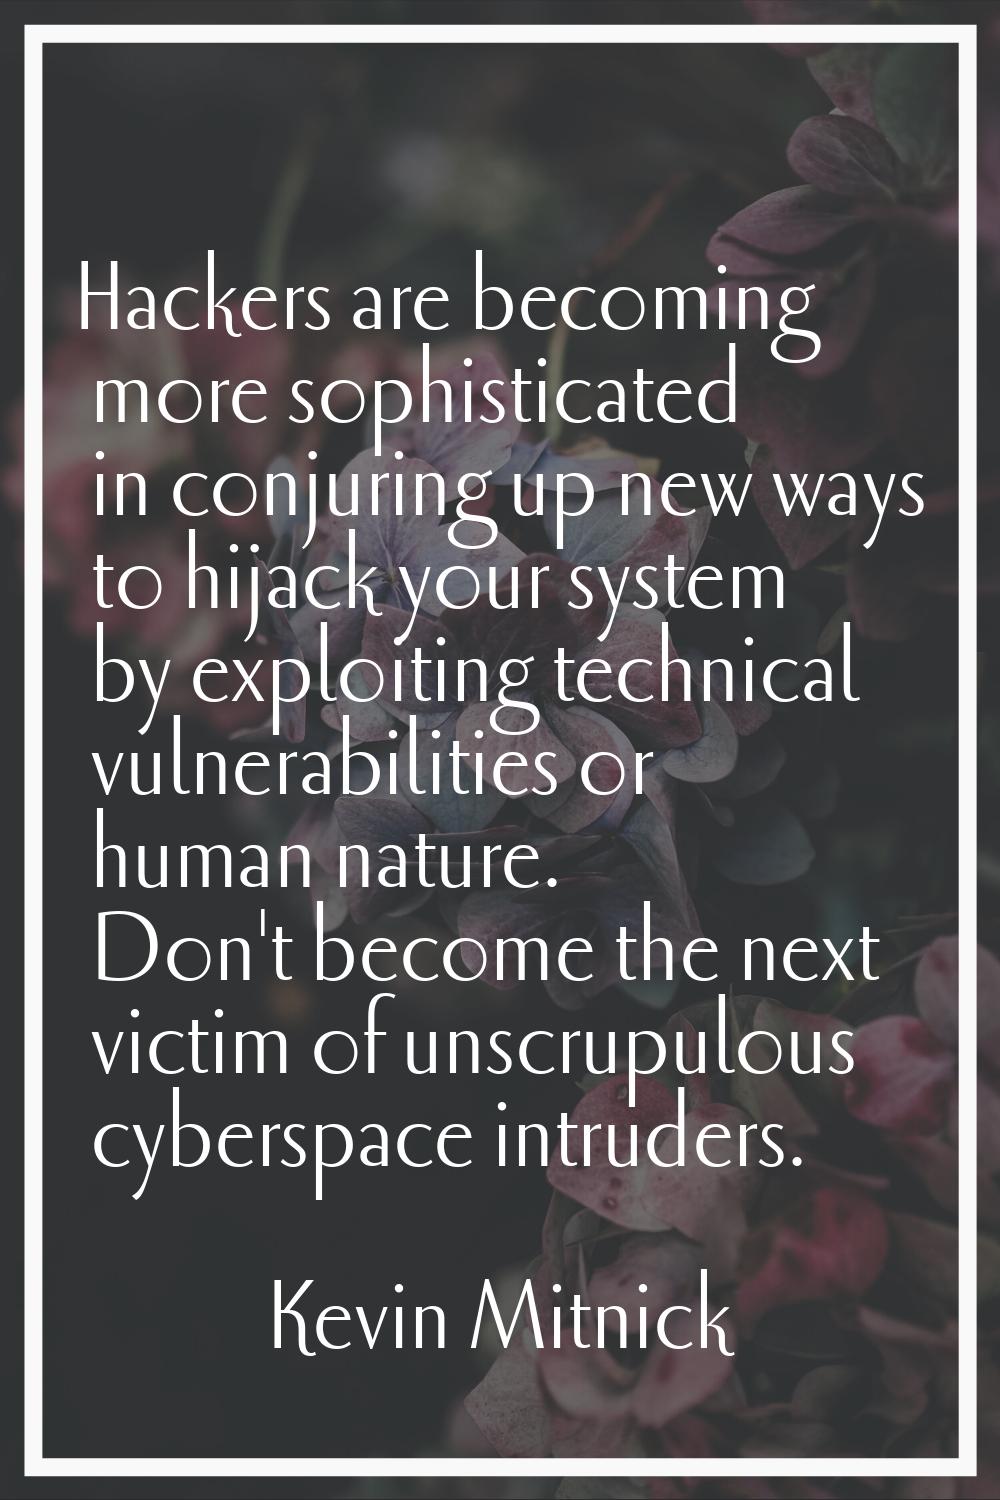 Hackers are becoming more sophisticated in conjuring up new ways to hijack your system by exploitin